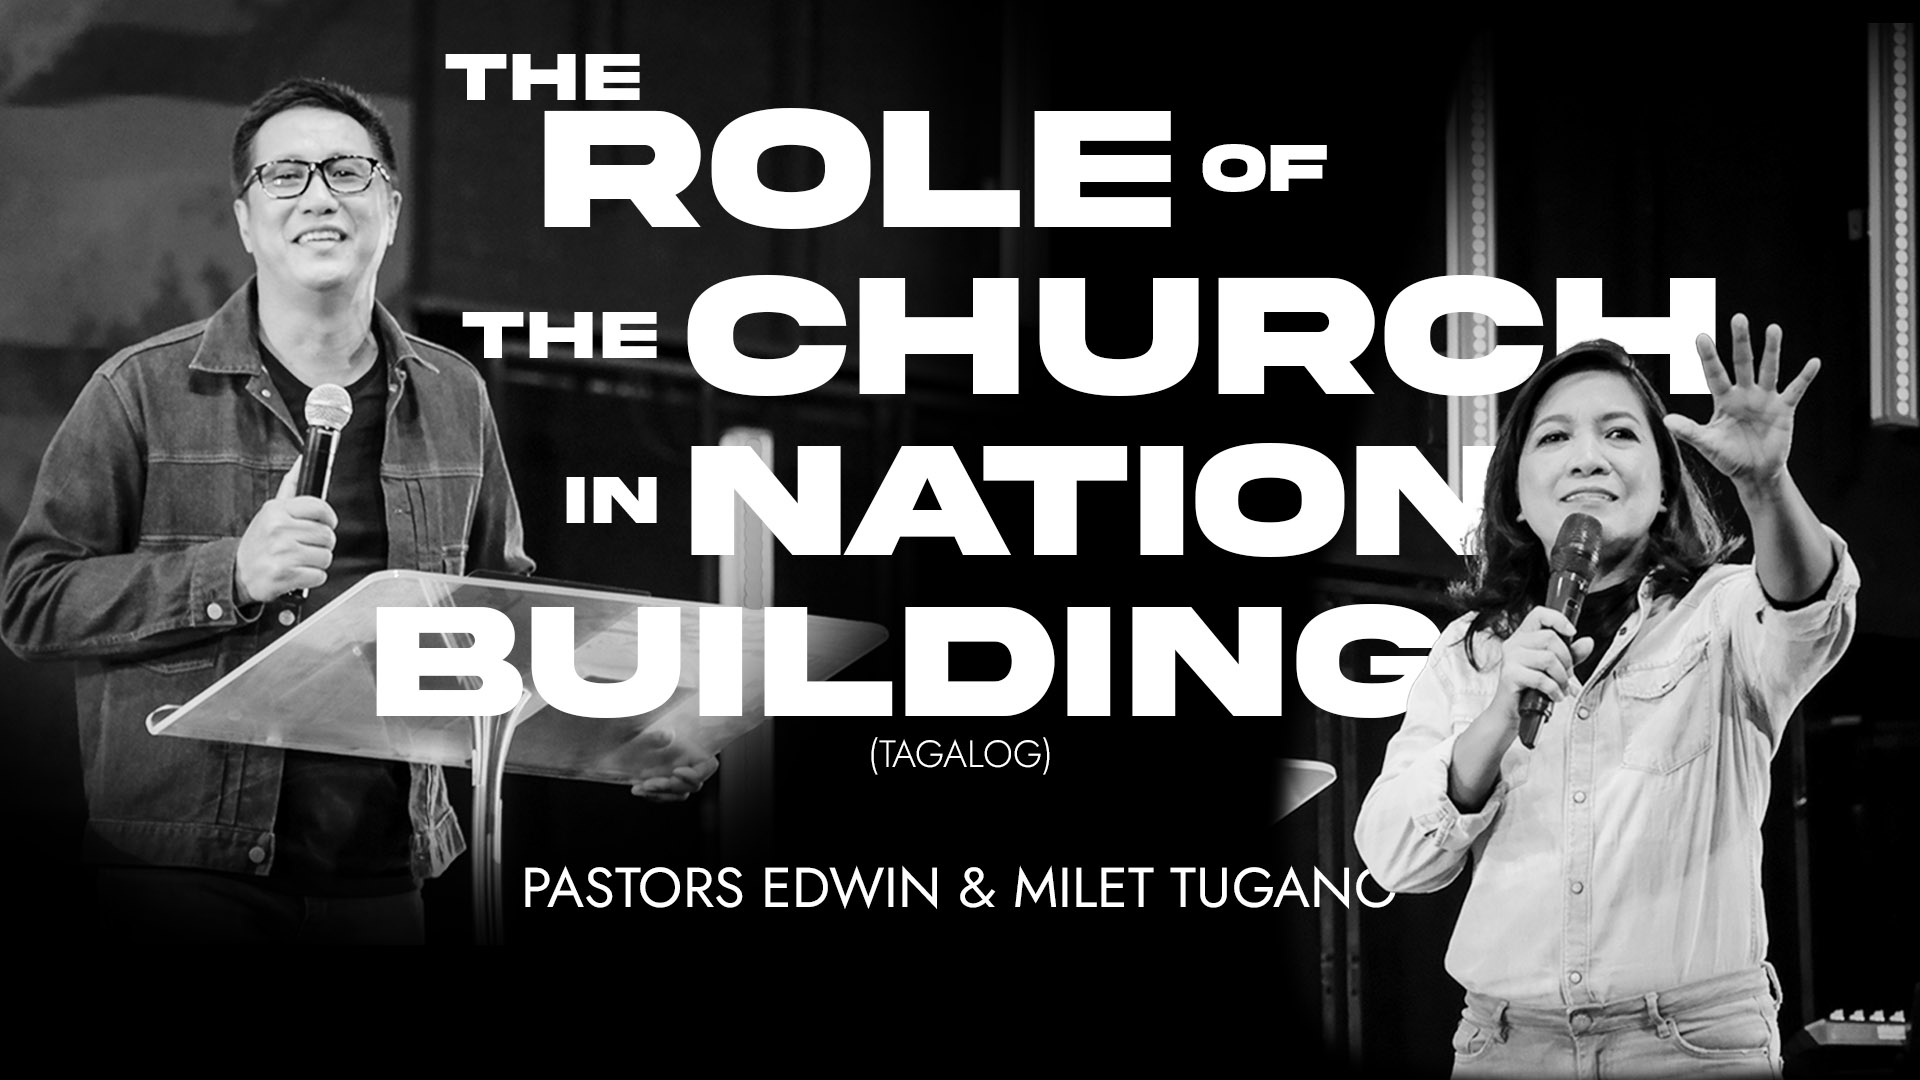 THE ROLE OF THE CHURCH IN NATION BUILDING Image